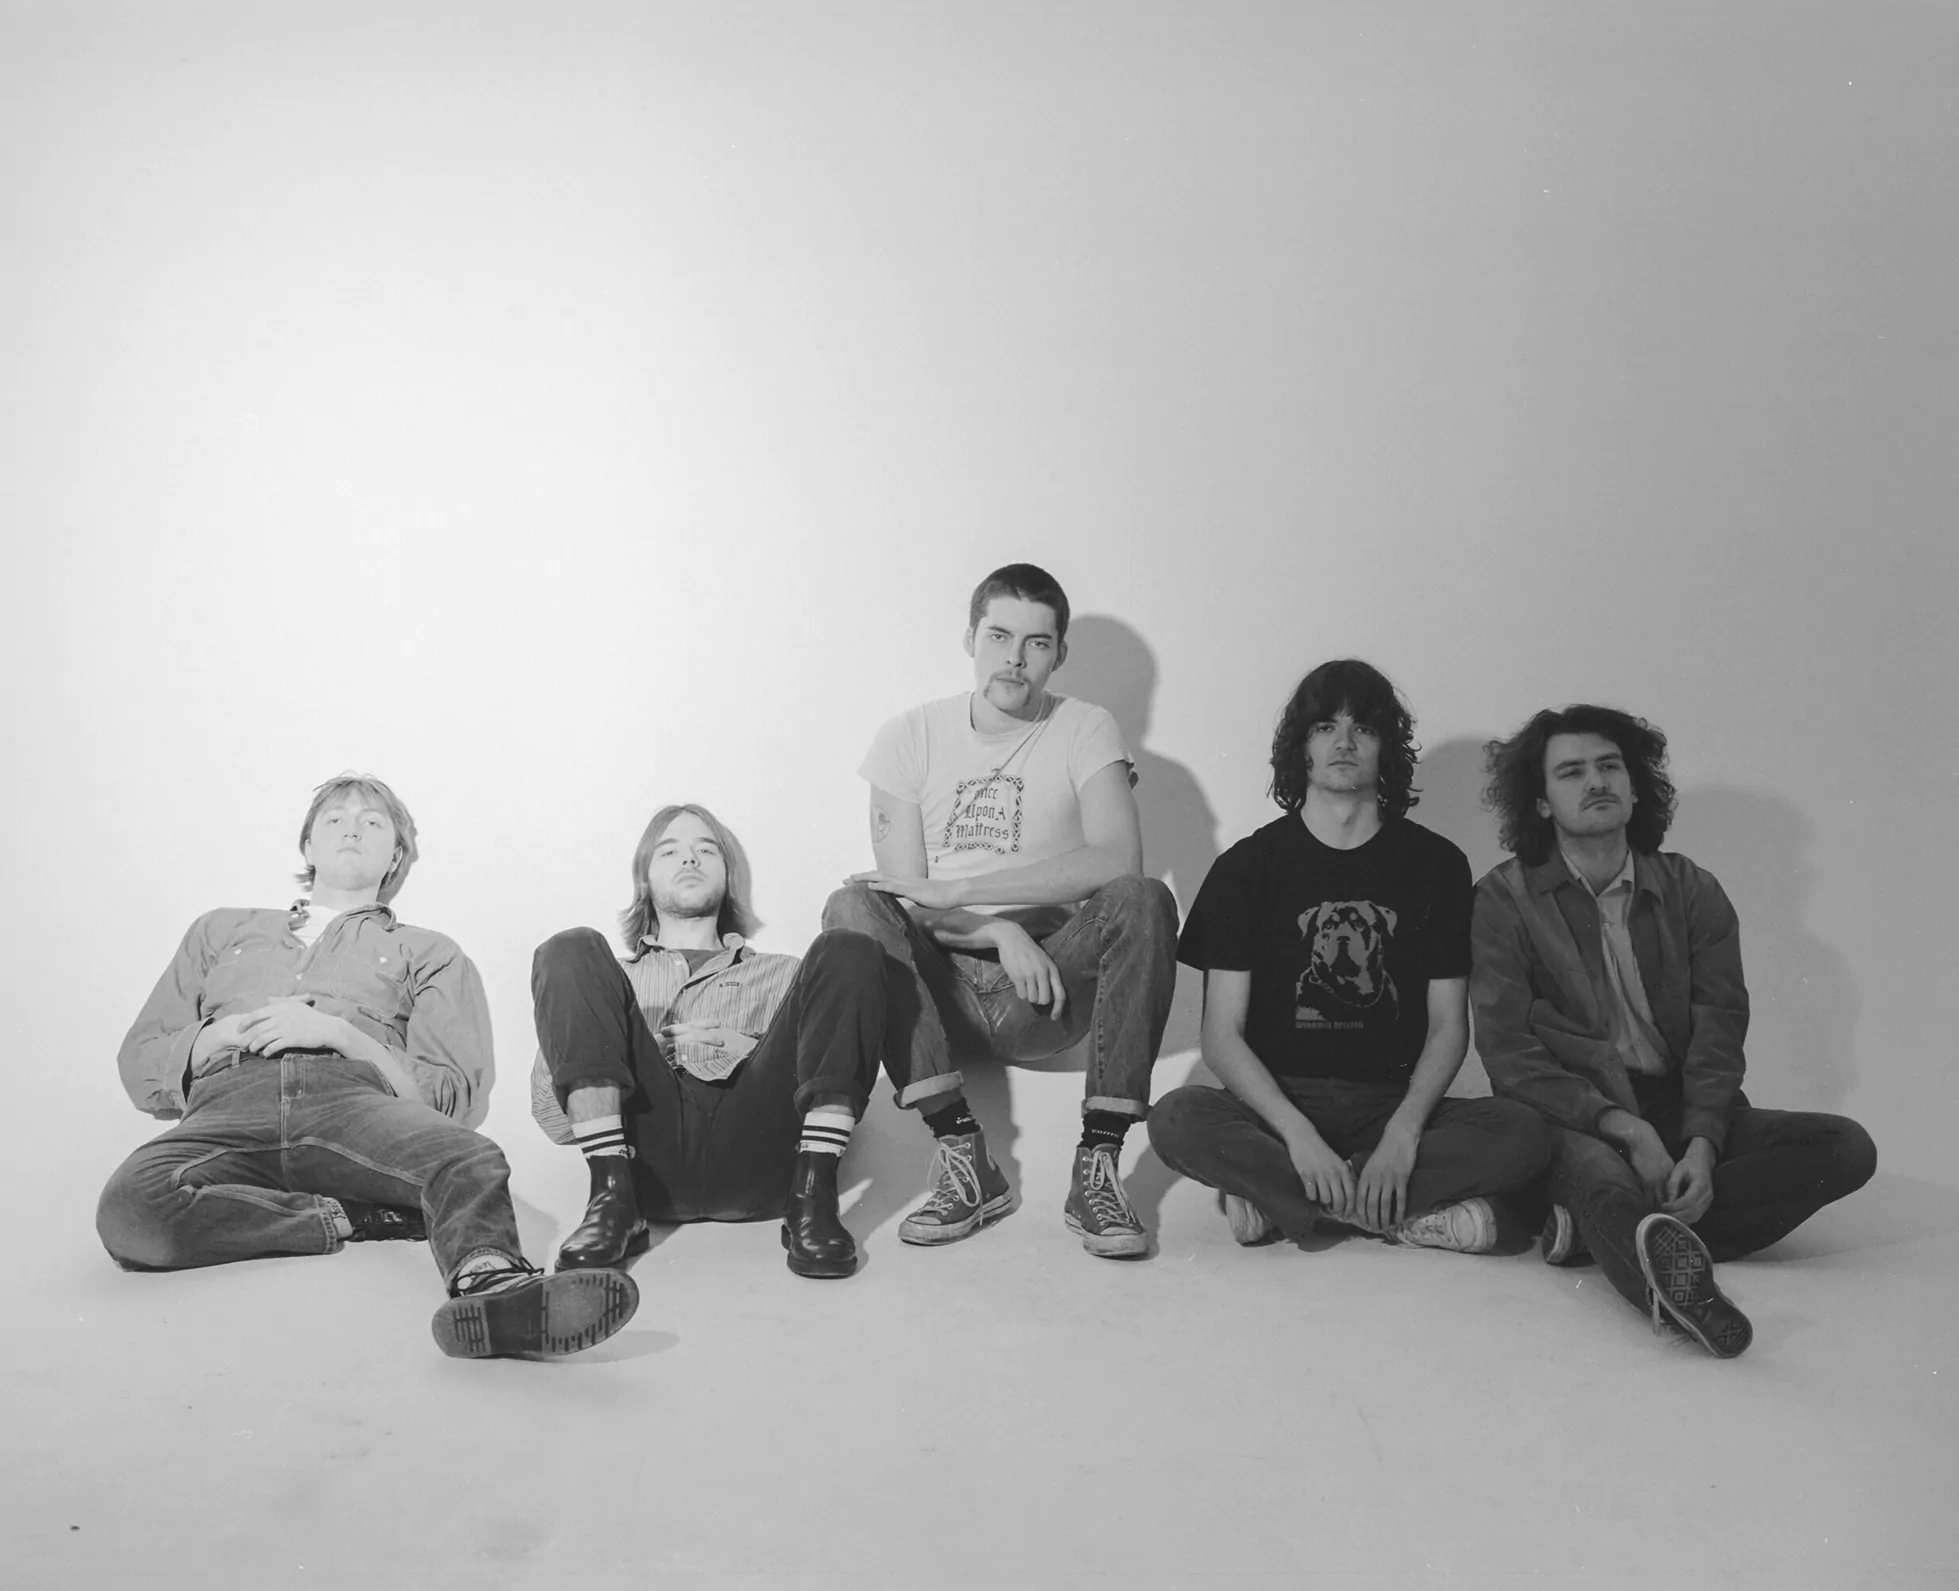 FEET share new track ‘Library’ from upcoming ‘Walking Machine’ EP